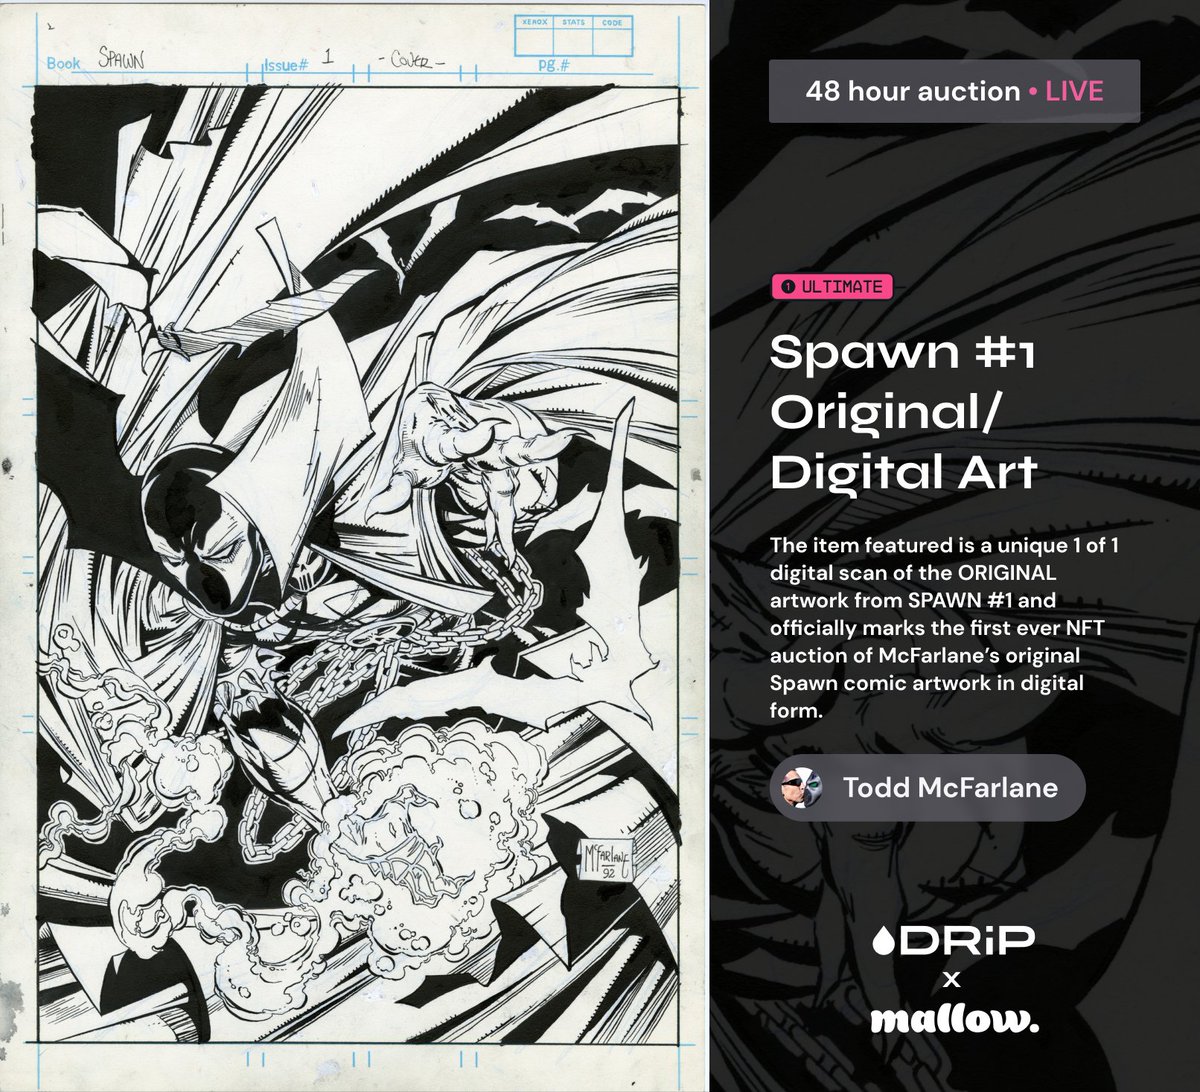 SPAWN #1 • Original/Digital Art - @Todd_McFarlane Own a part of history with the digital 1/1 scan of the original cover artwork for Spawn #1! 🟥 48hr @drip_haus Ultimate auction LIVE now. See comments ↓